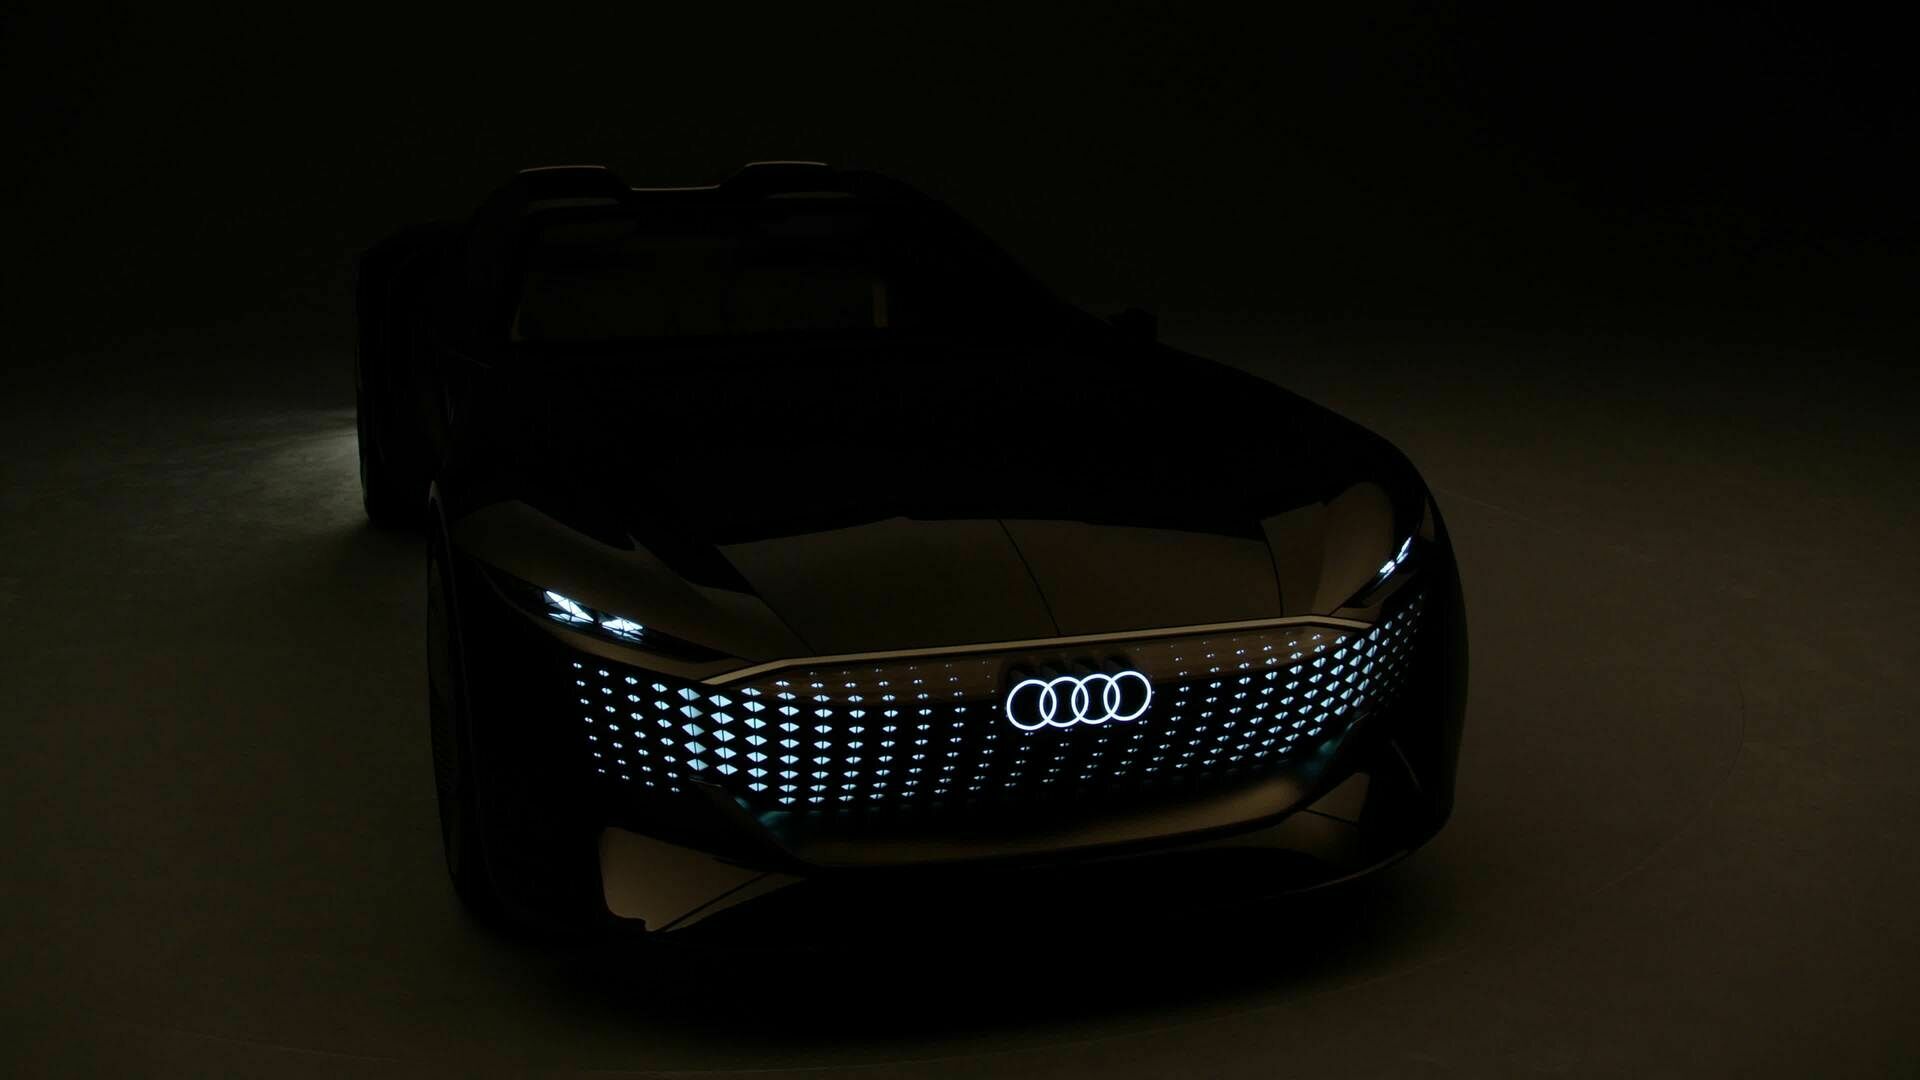 The next chapter of progress revealed: the Audi skysphere concept